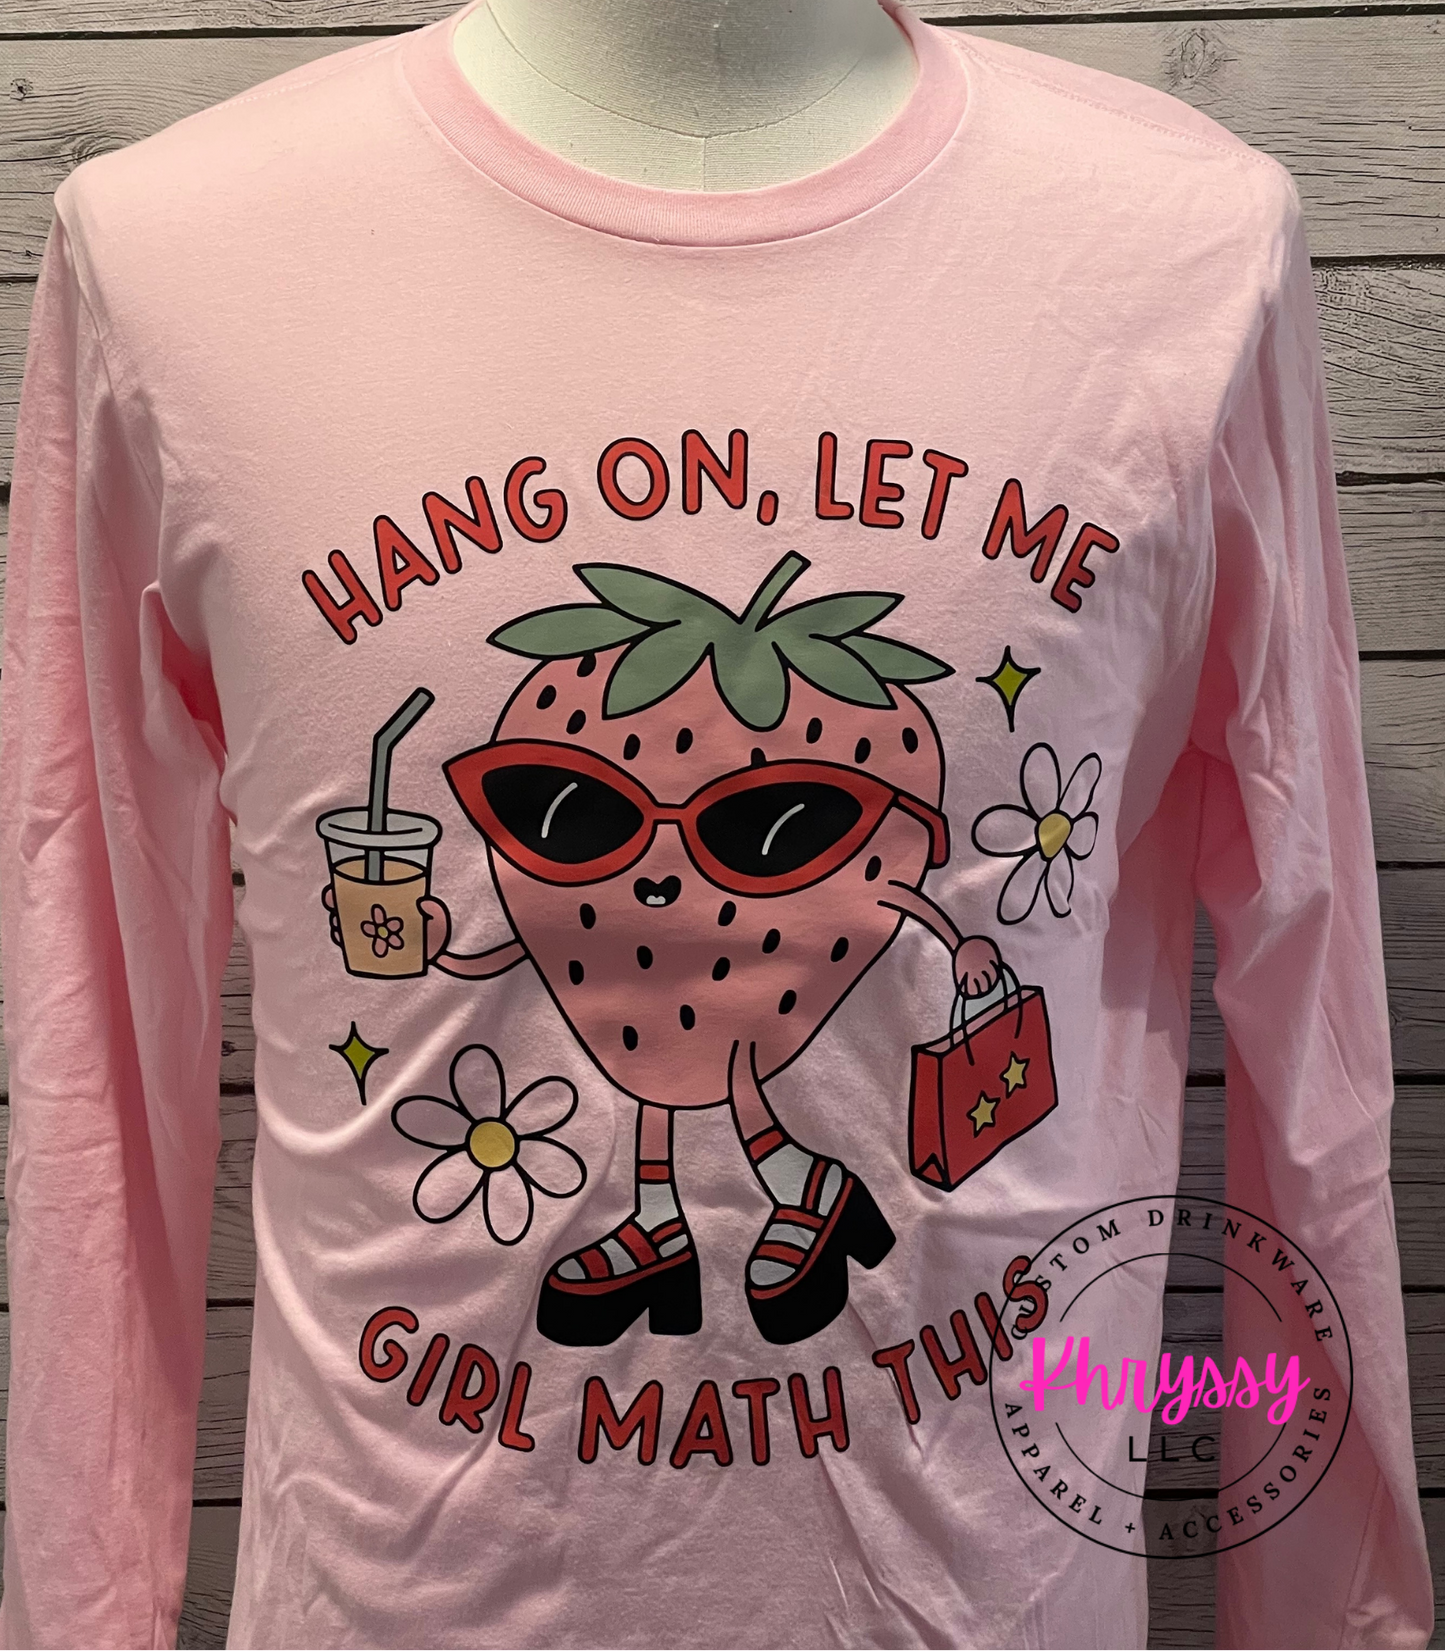 READY TO SHIP: Hang On, Let Me Girl Math This Unisex Shirt